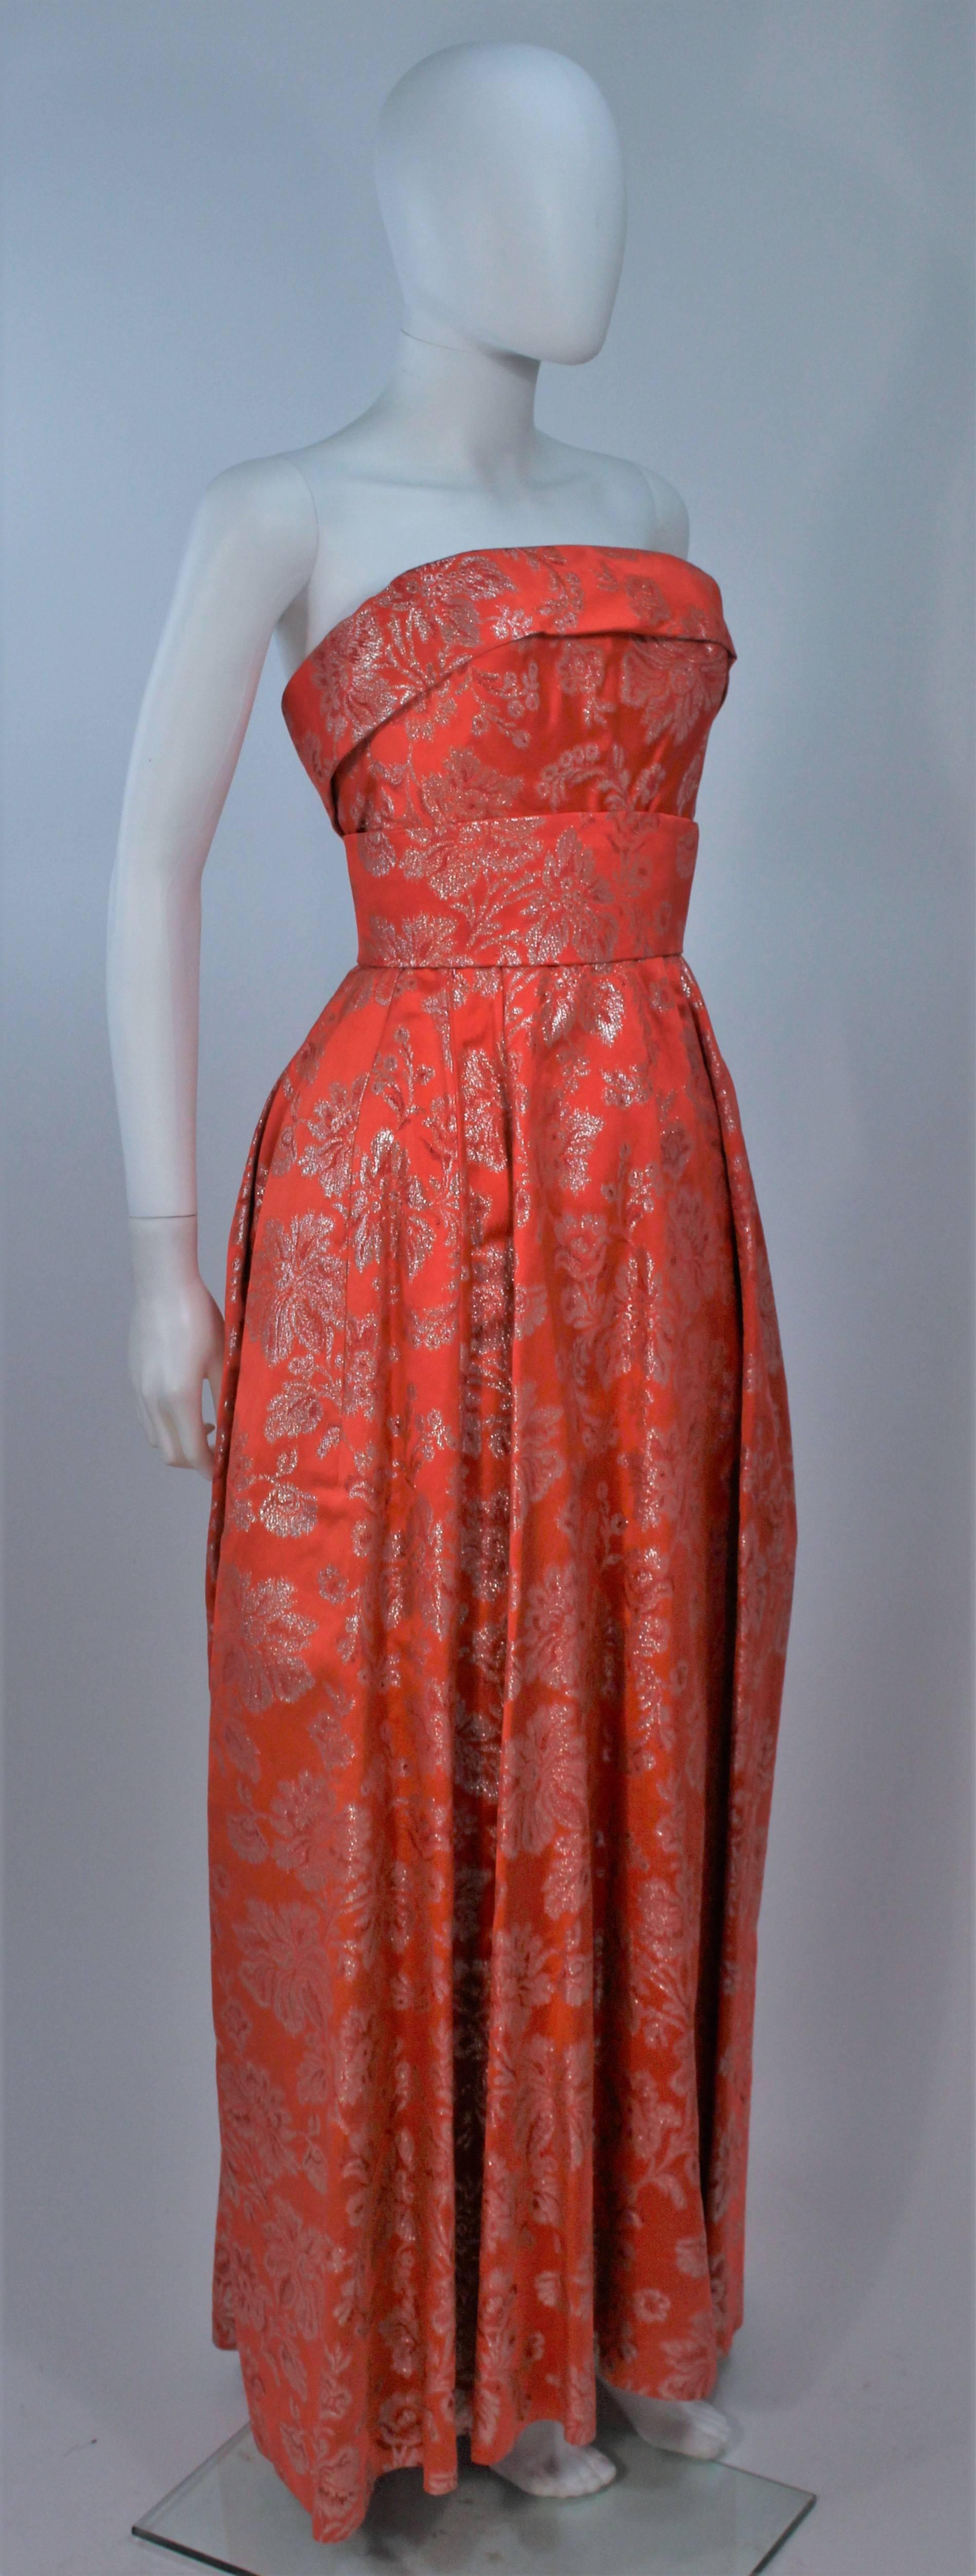 Women's 1950's Coral Orange Lame Strapless Gown Size 4-6